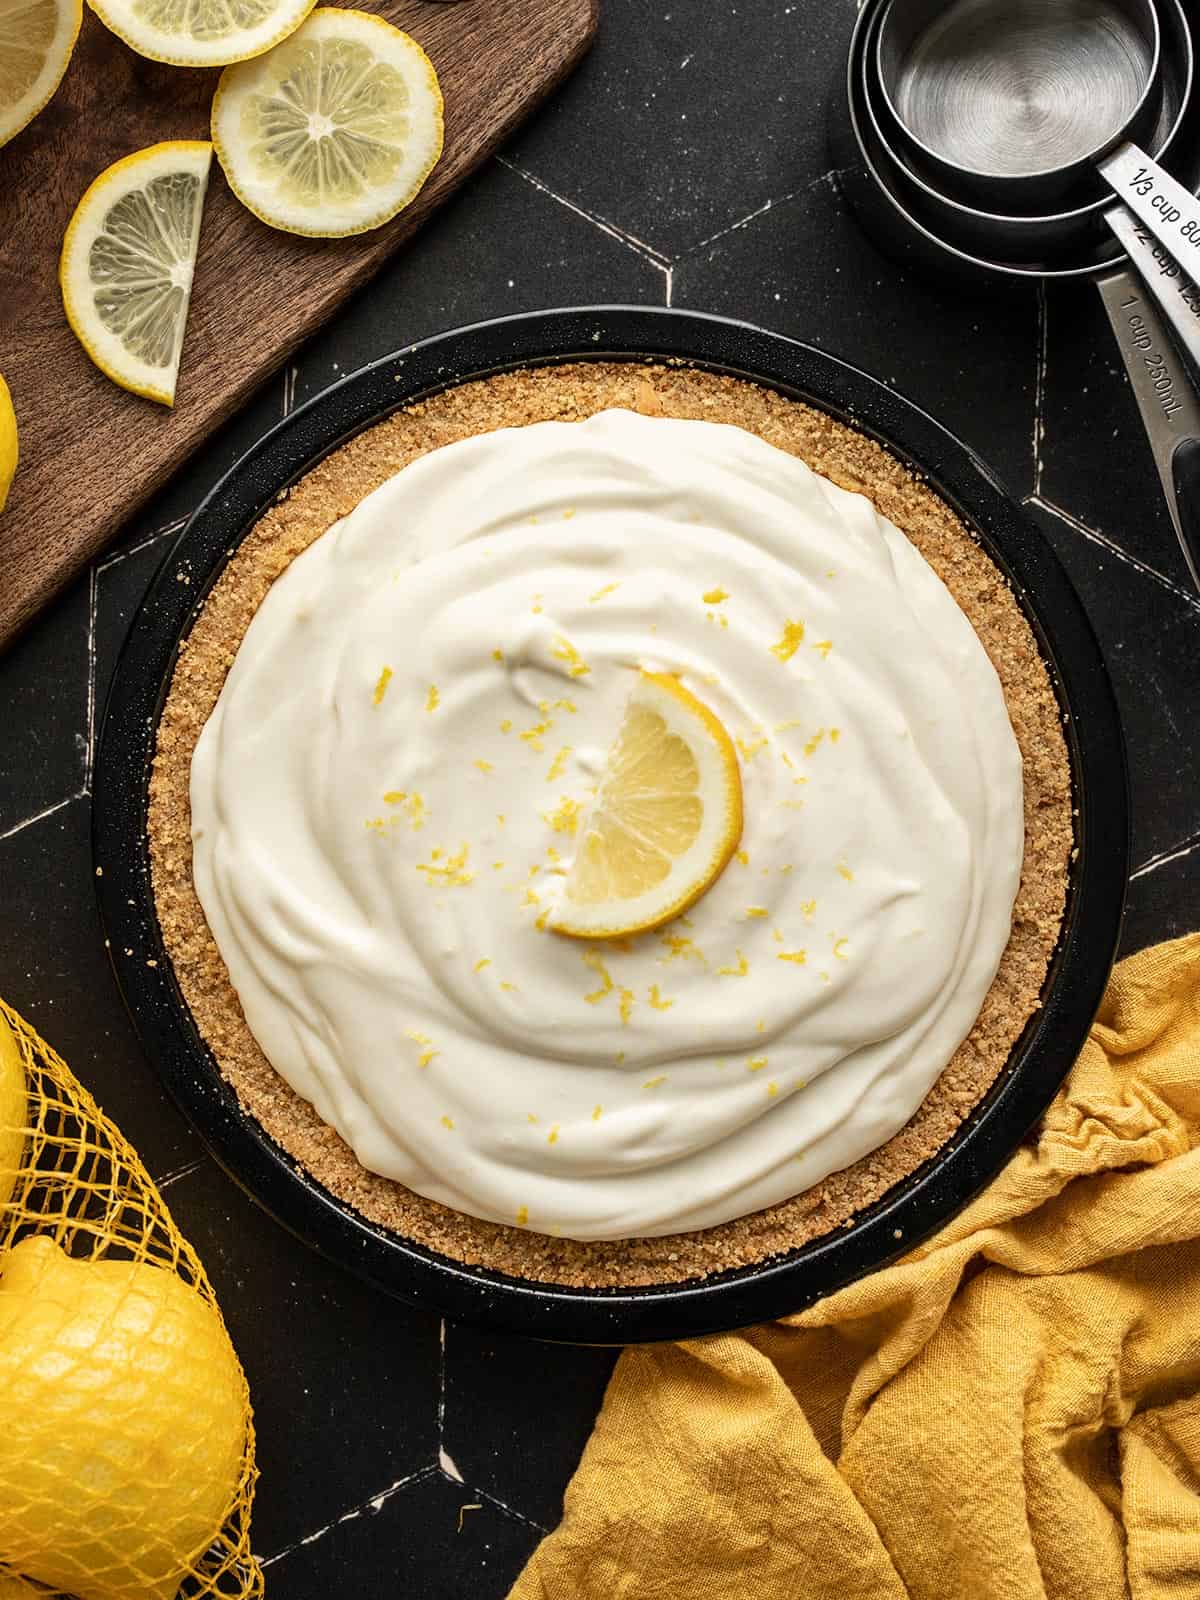 Overhead view of a lemon cream pie on black tile with lemons on the side